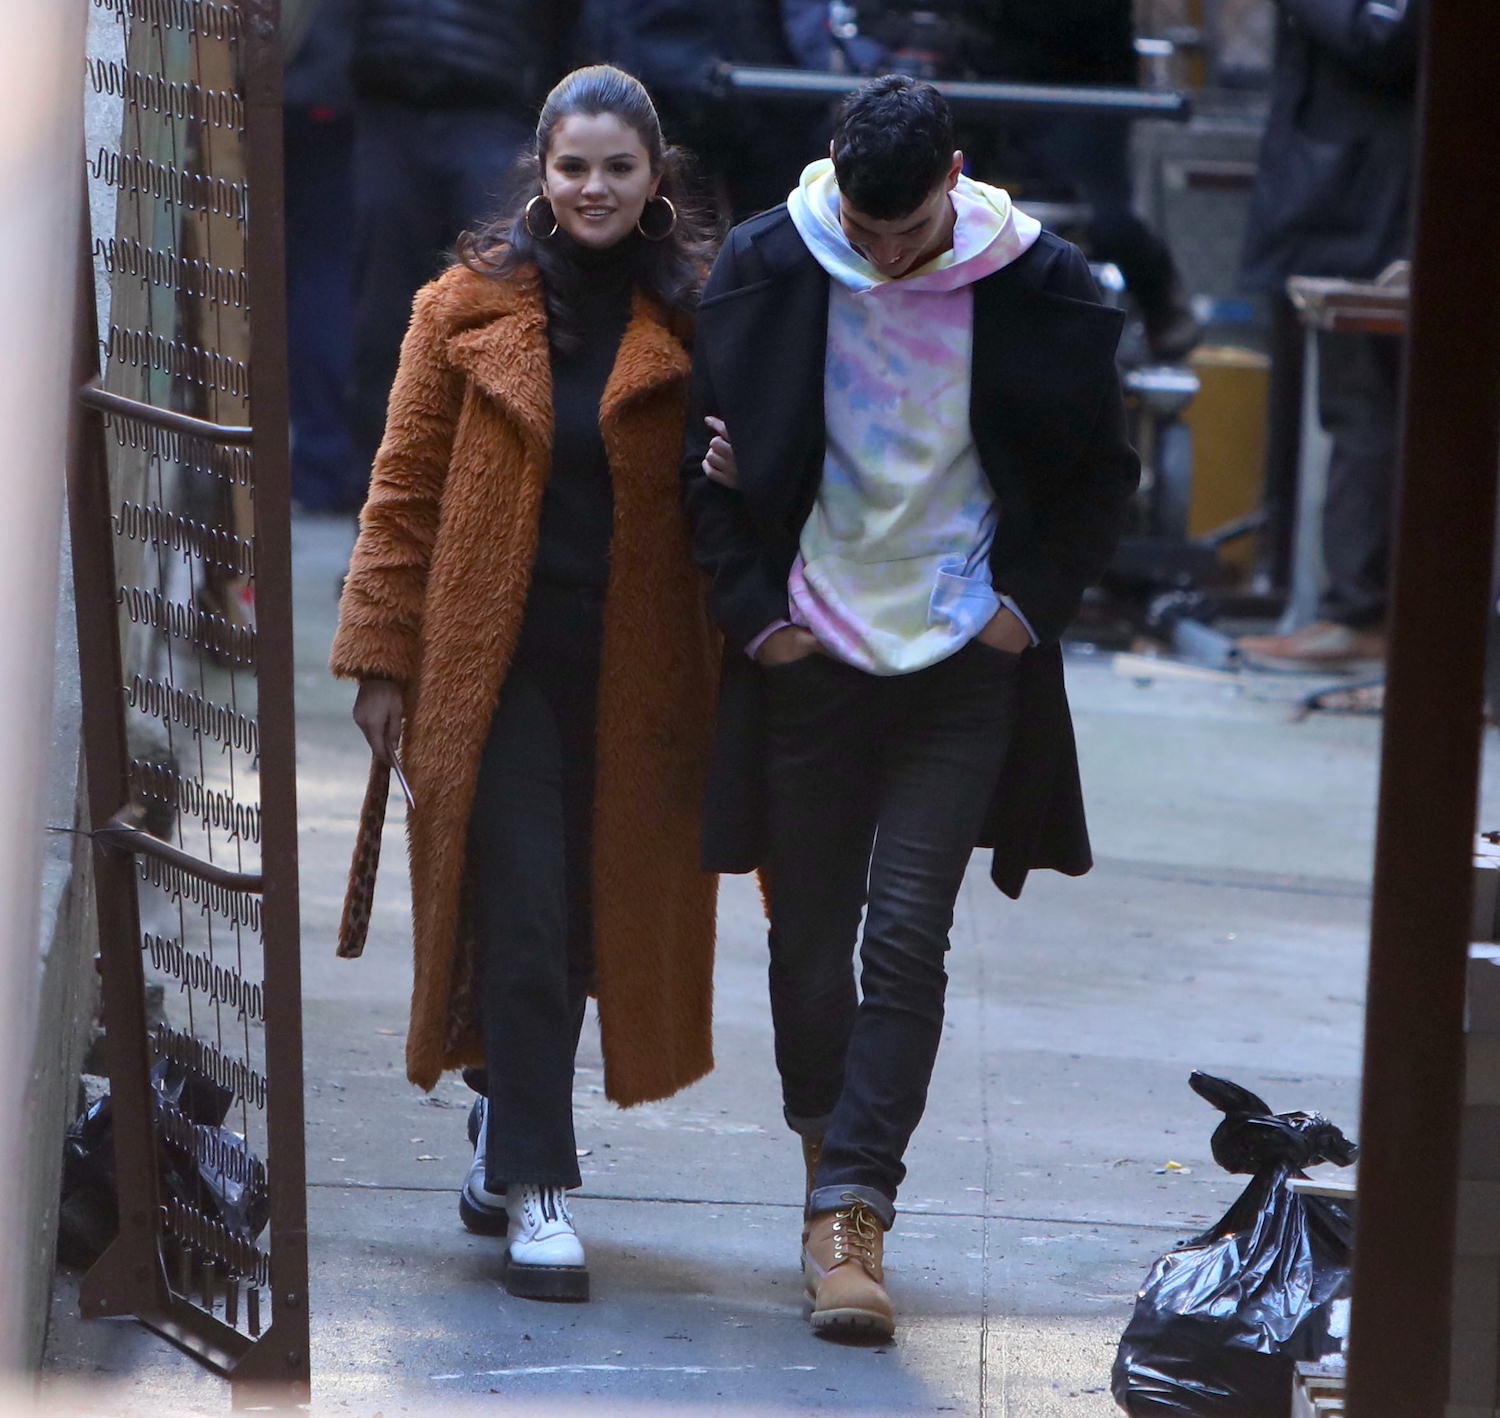 Selena Gomez and Aaron Dominguez on the set of 'Only Murders in the Building' on February 24, 2021 in New York City